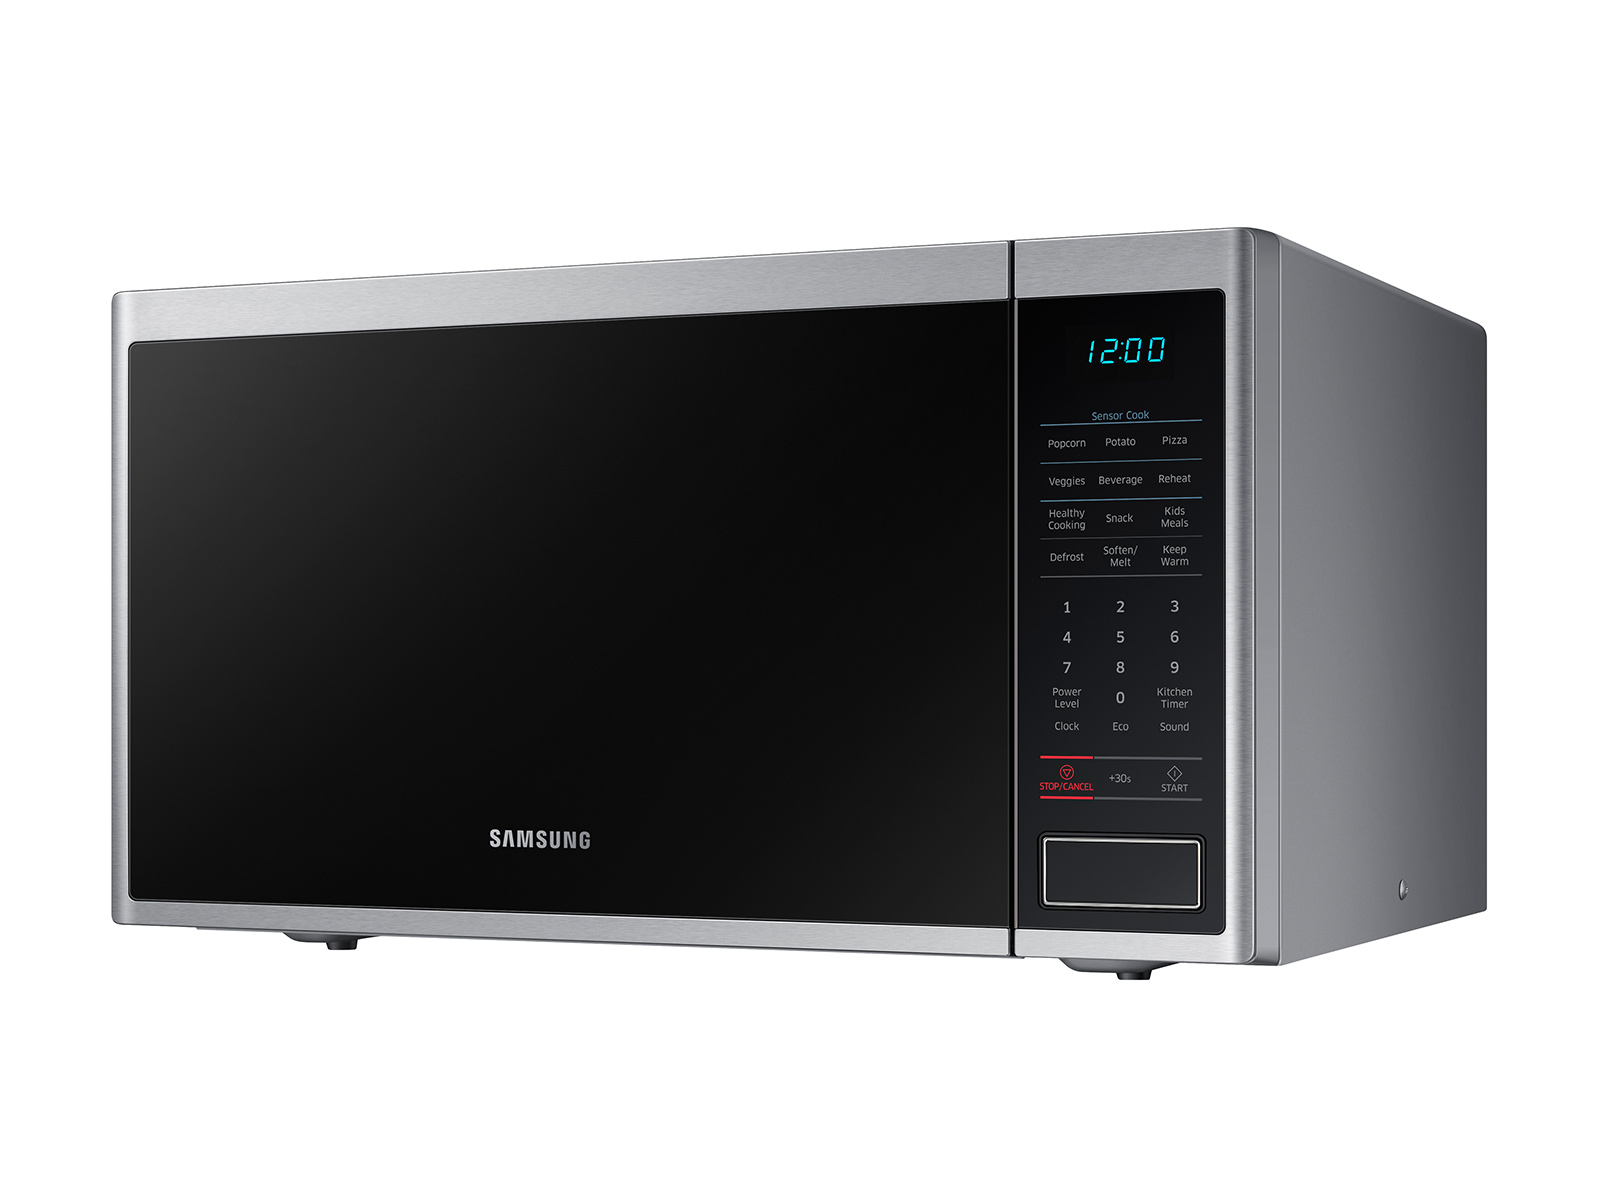 https://image-us.samsung.com/SamsungUS/home/home-appliances/microwaves/countertop/pdp/ms14k6000as/gallery/06_Microwave_Countertop_MS14K6000AS_R-Perspective_Closed_Other_Angle_Silver.jpg?$product-details-jpg$